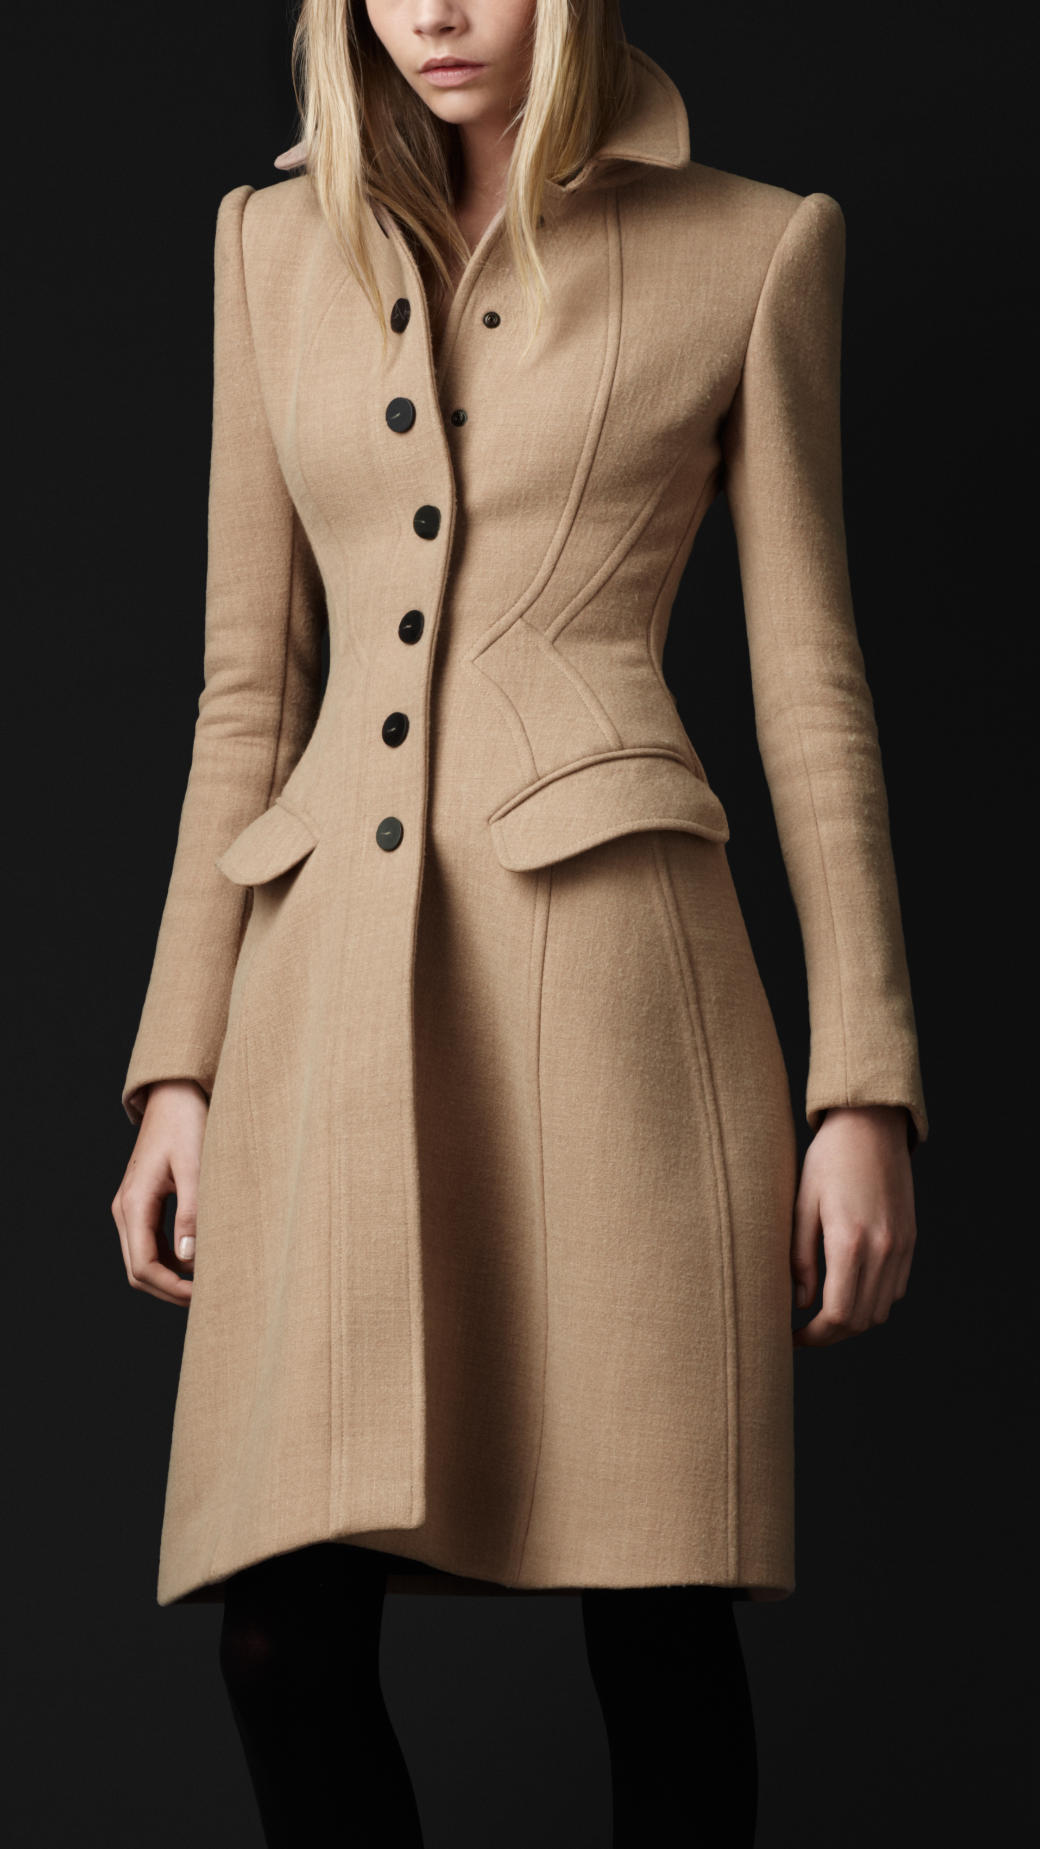 Burberry Prorsum Crêpe Wool Tailored Coat in Natural | Lyst